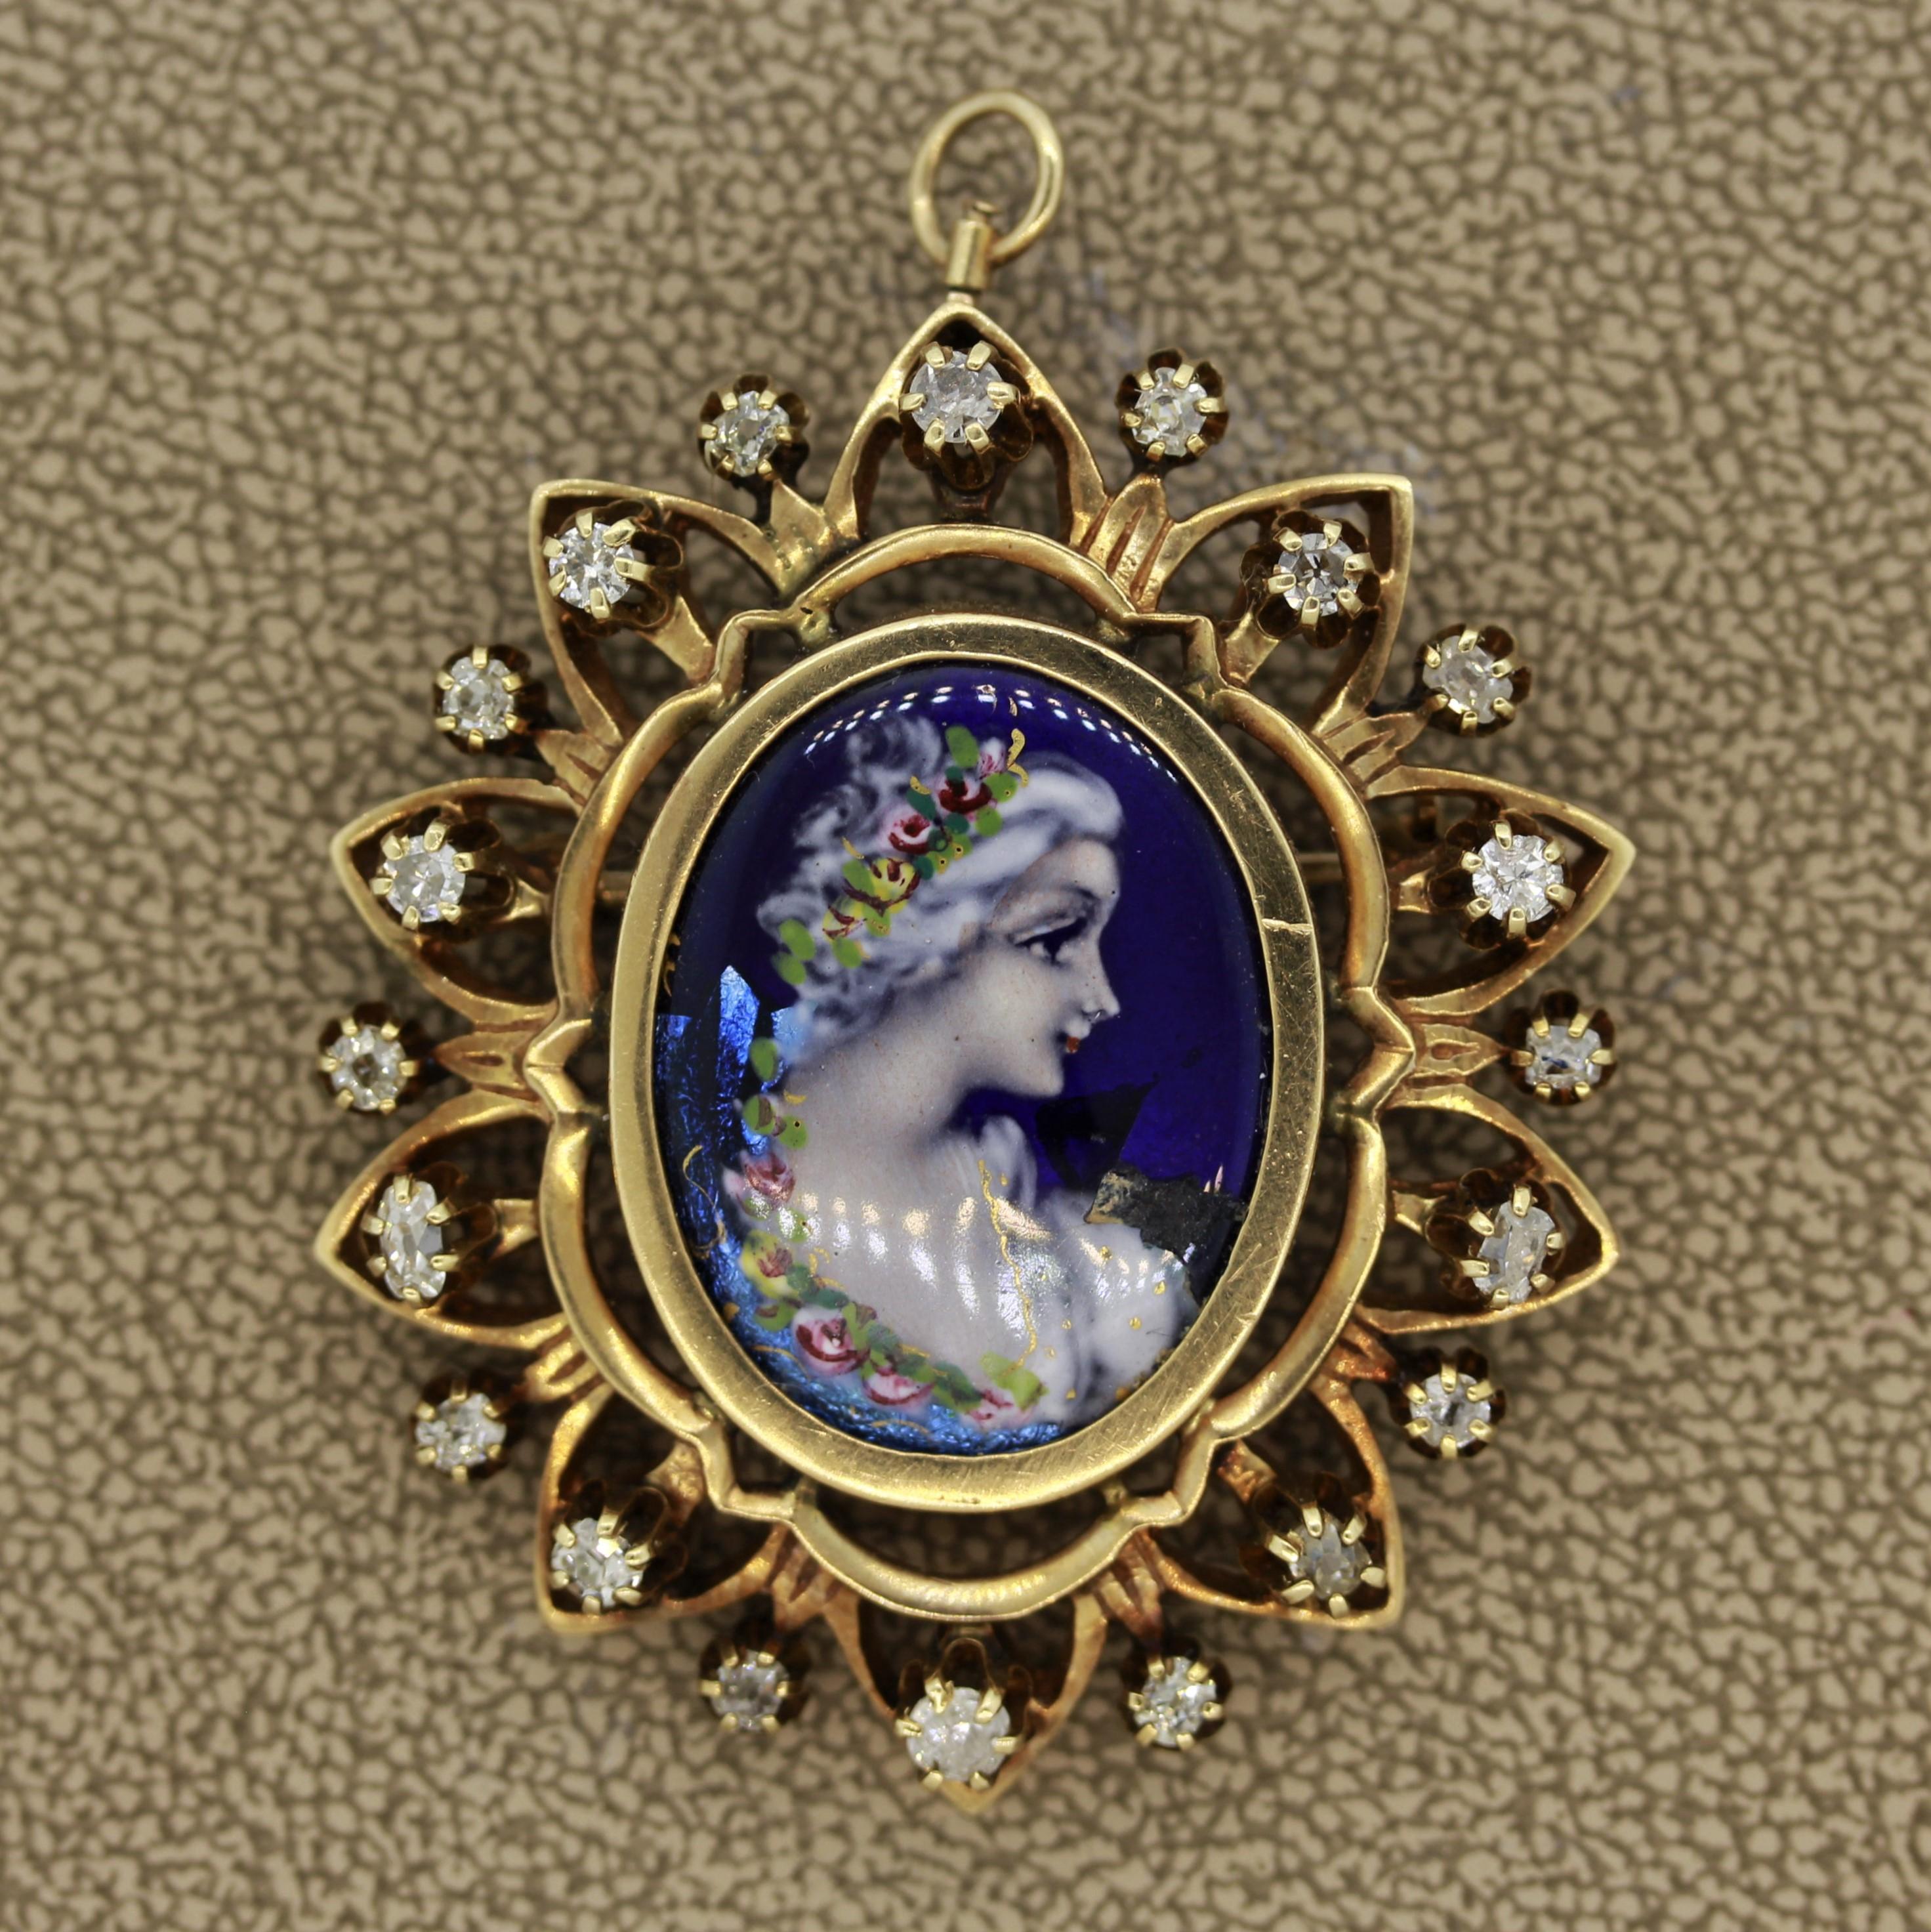 A lovely example of Victorian design. This 19th century treasure features a hand painted porcelain depicting a royal woman in an elegant dress and flowers in her hair. The 14k yellow gold frame features 1.20 carats of antique cut diamonds. Hand